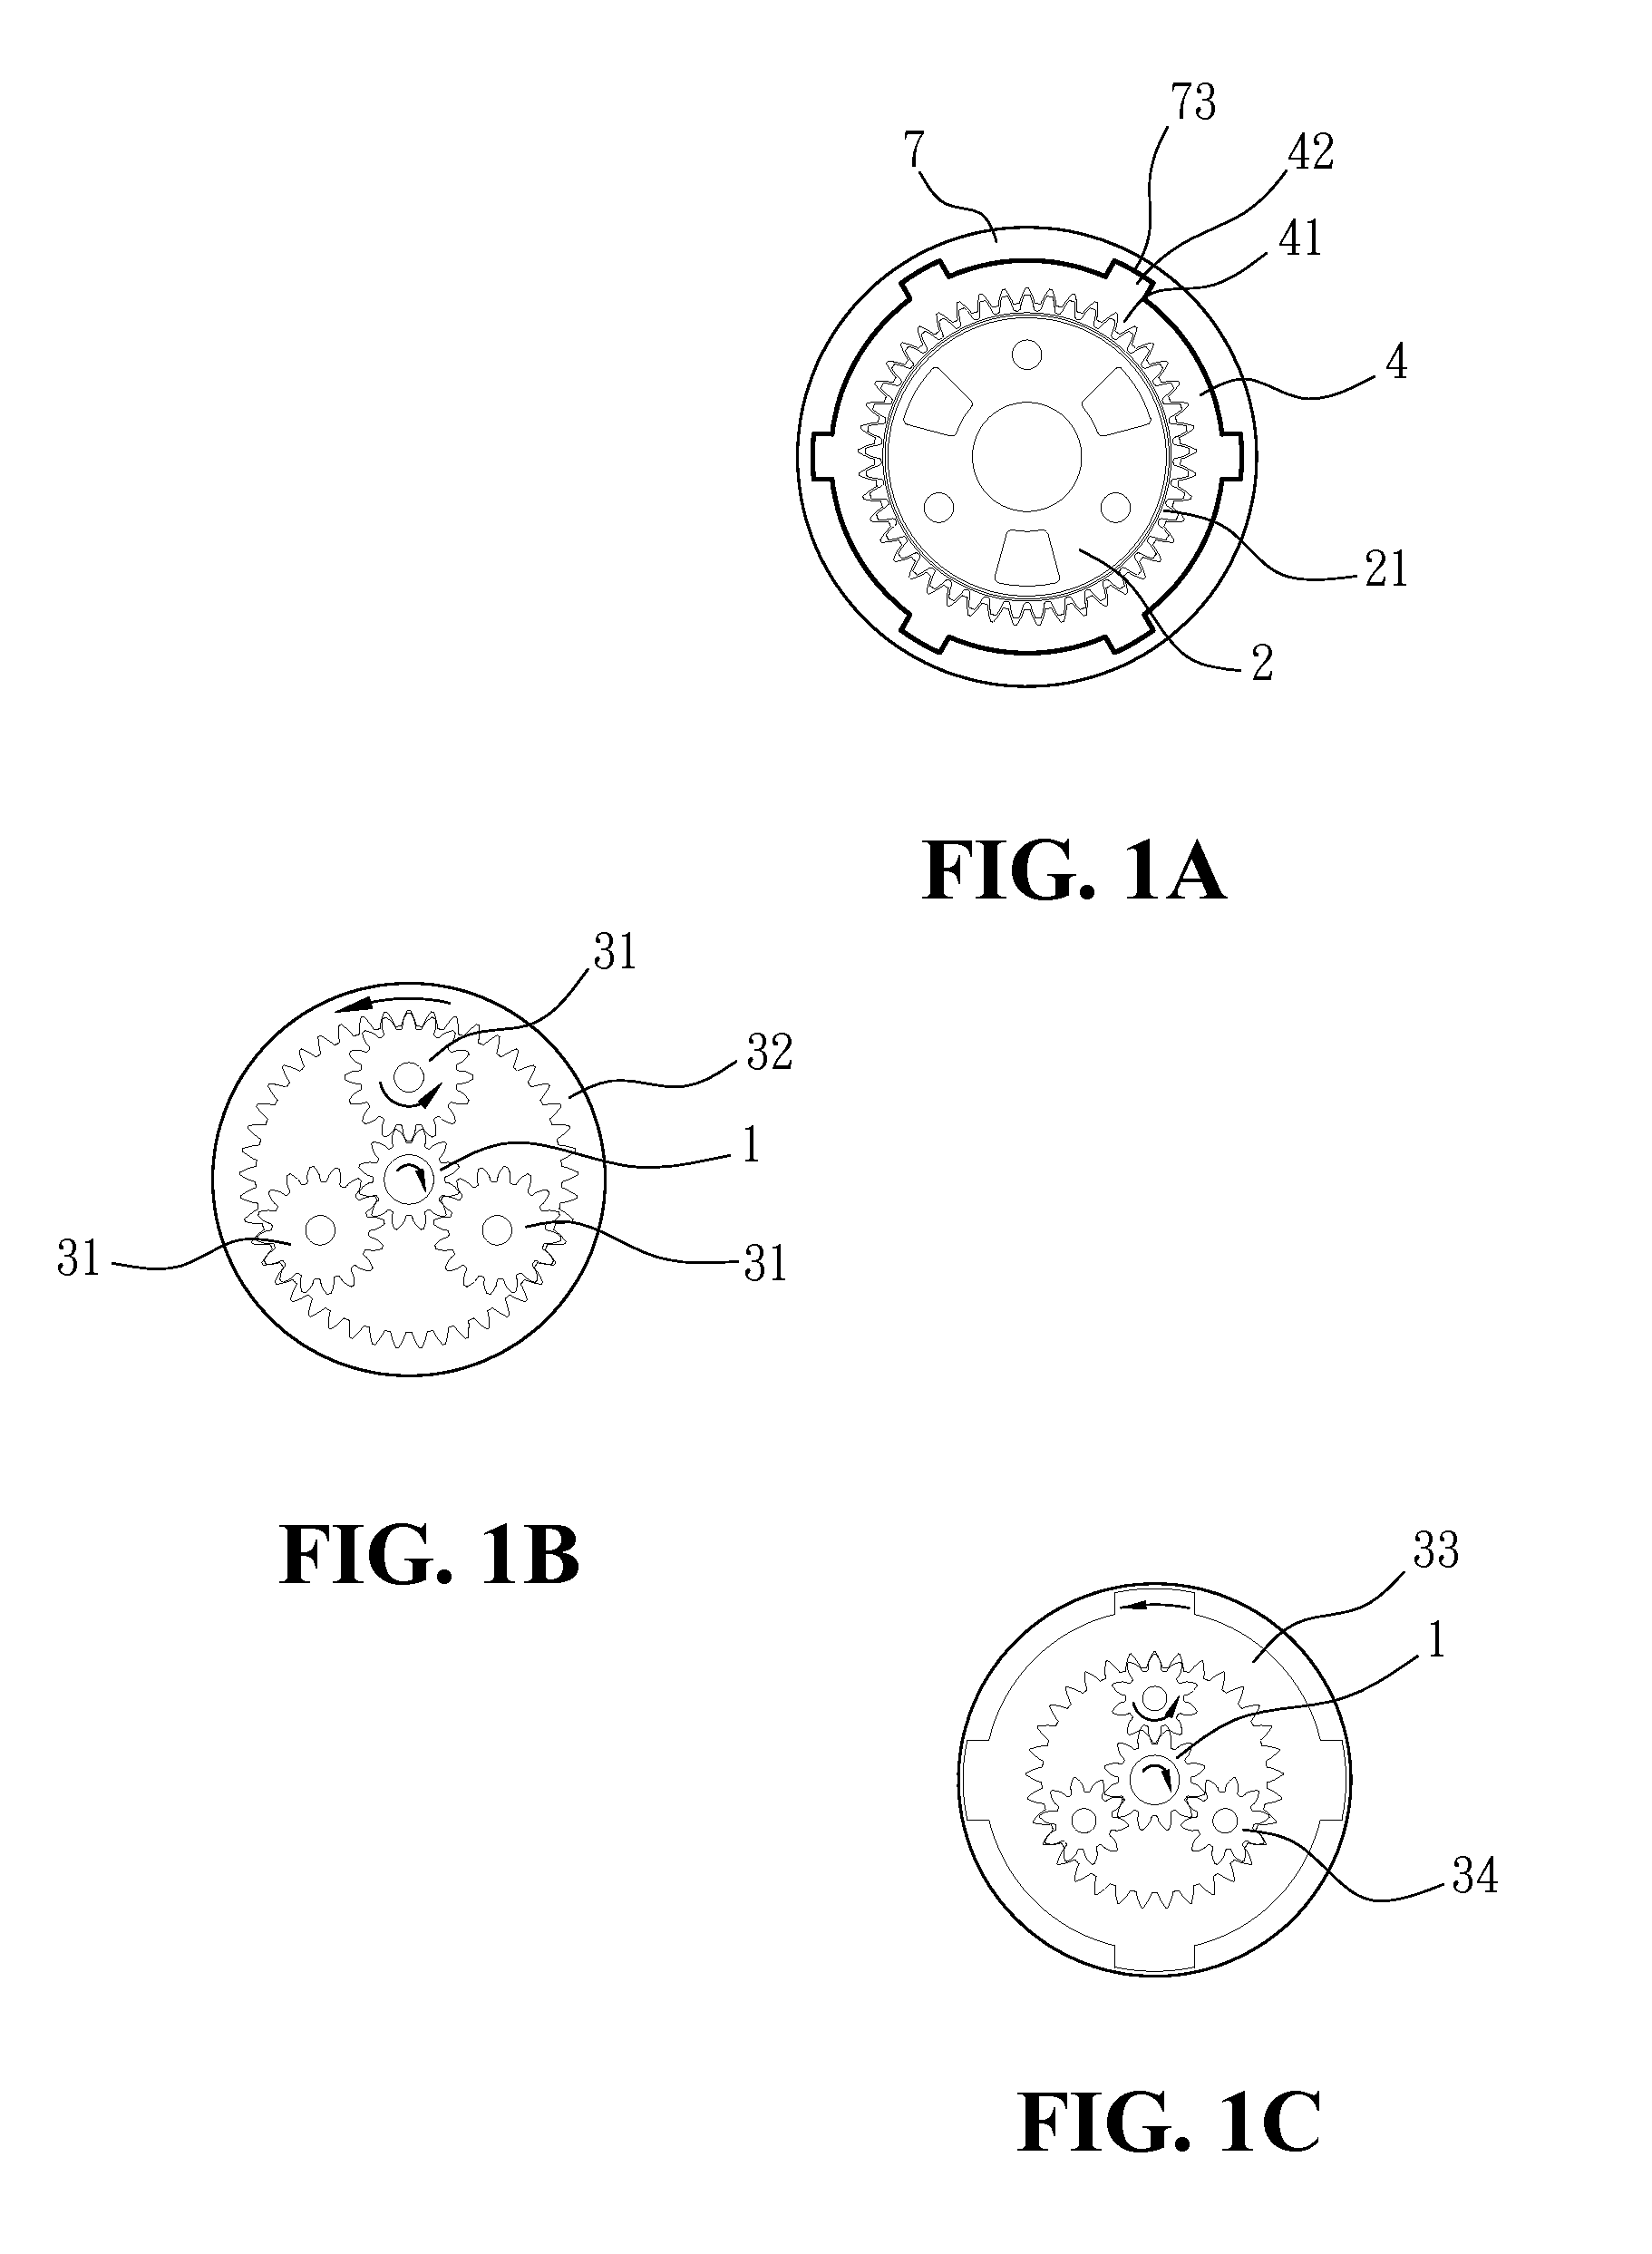 Multi-gear mechanism for power tools